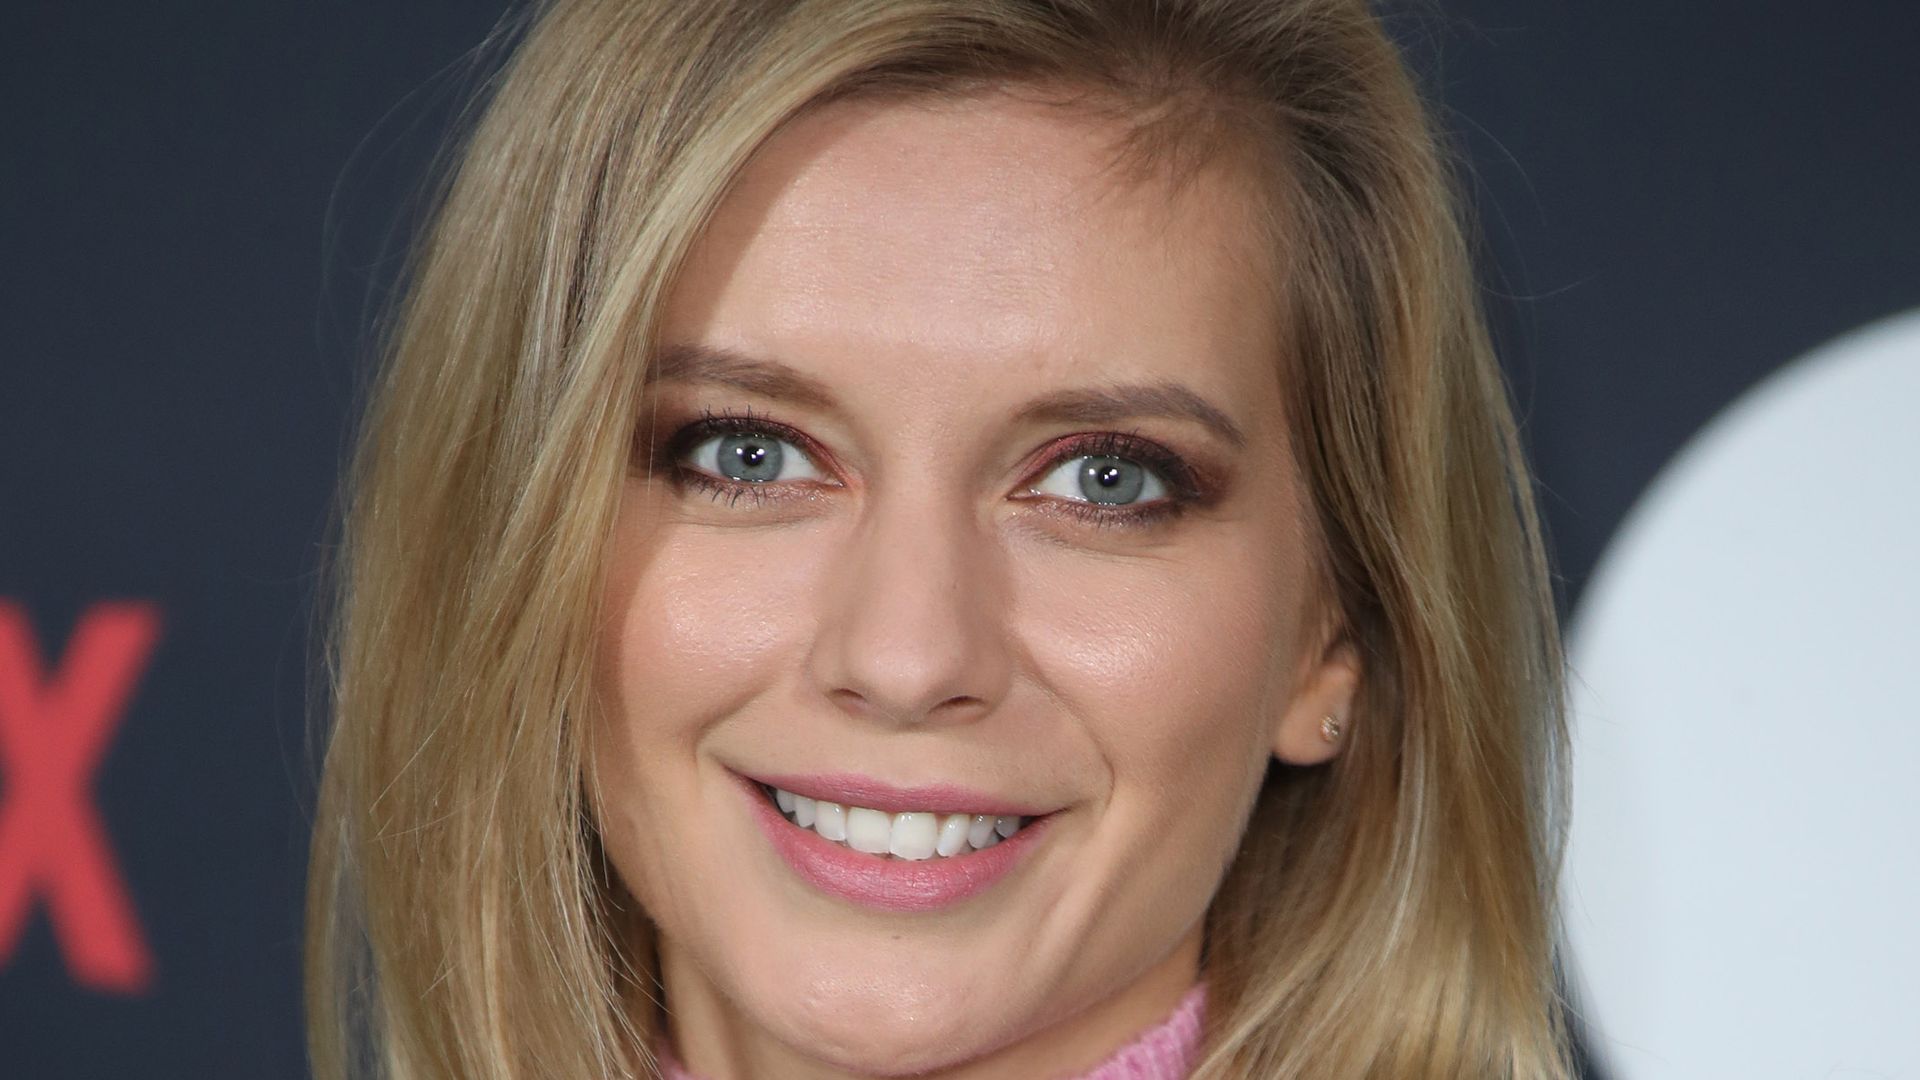 Rachel Riley stuns fans with precious photo of mini-me daughters - and Maven looks so grown up!